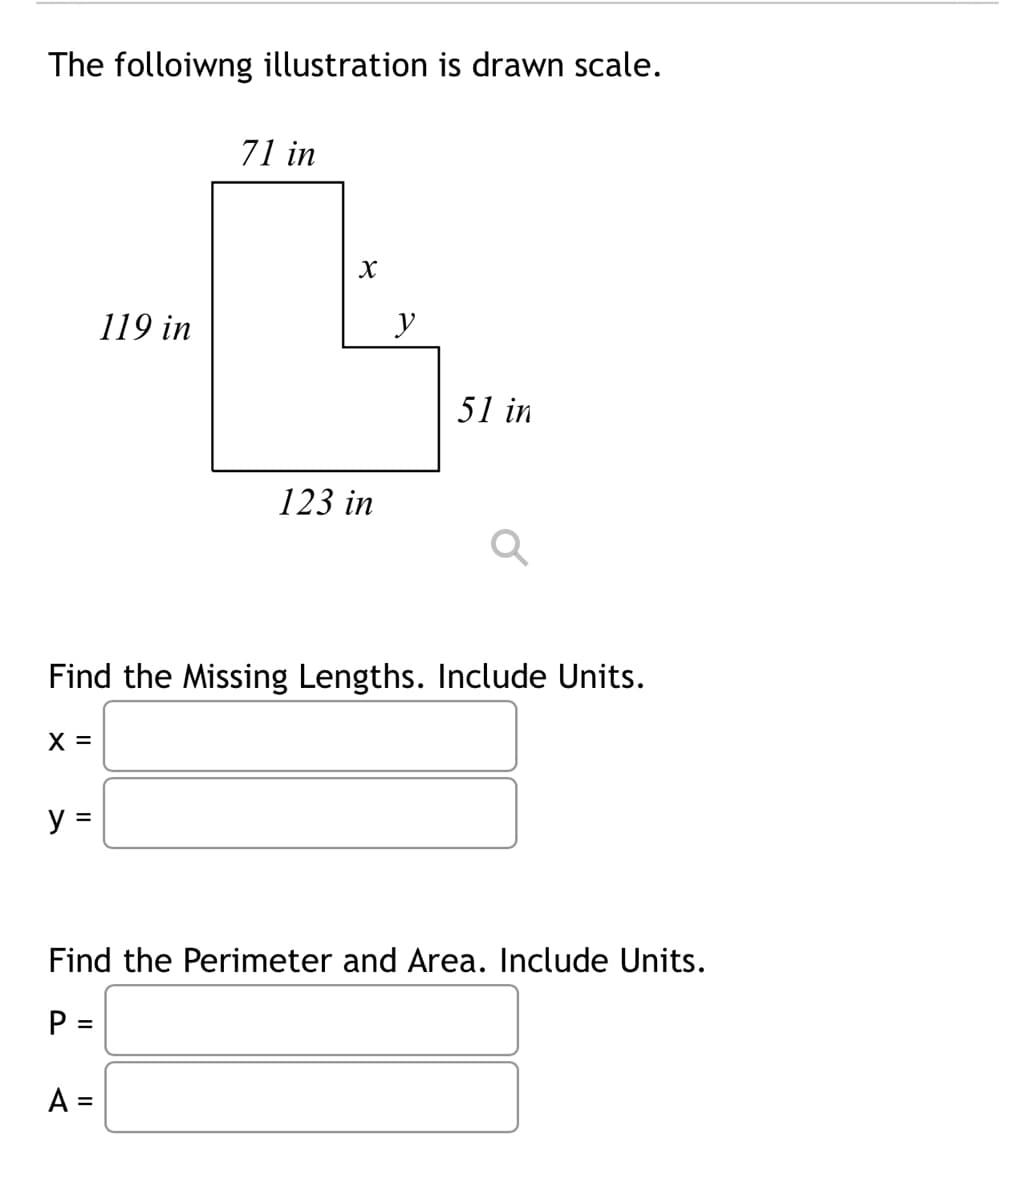 The folloiwng illustration is drawn scale.
y =
119 in
71 in
A =
X
123 in
y
Find the Missing Lengths. Include Units.
X =
51 in
Find the Perimeter and Area. Include Units.
P =